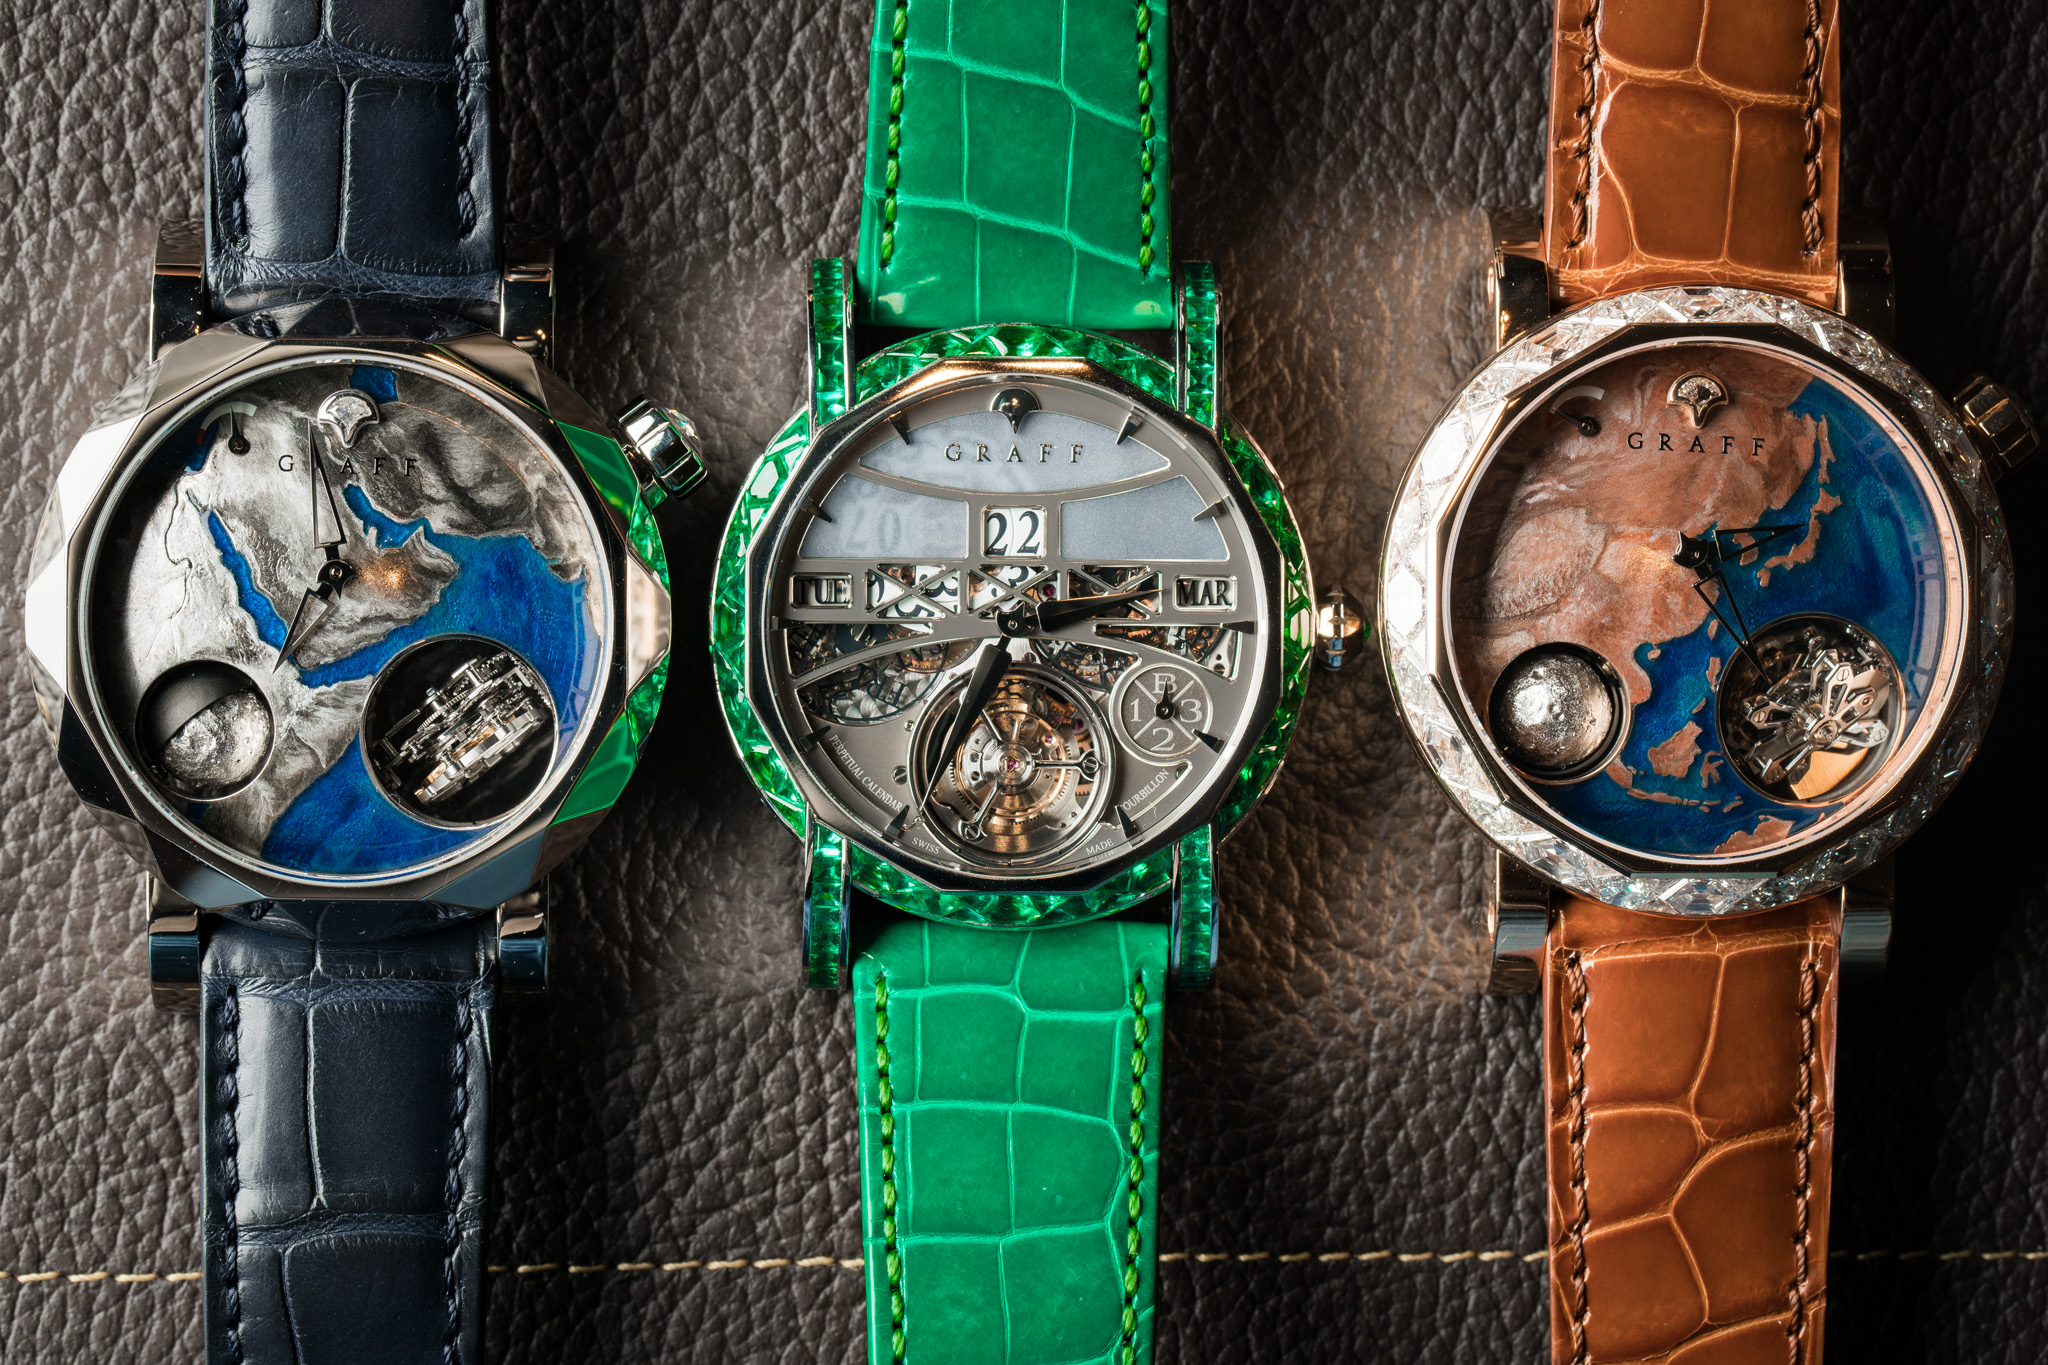 Baselworld 2016: Introducing the GyroGraff World from Graff Luxury Watches